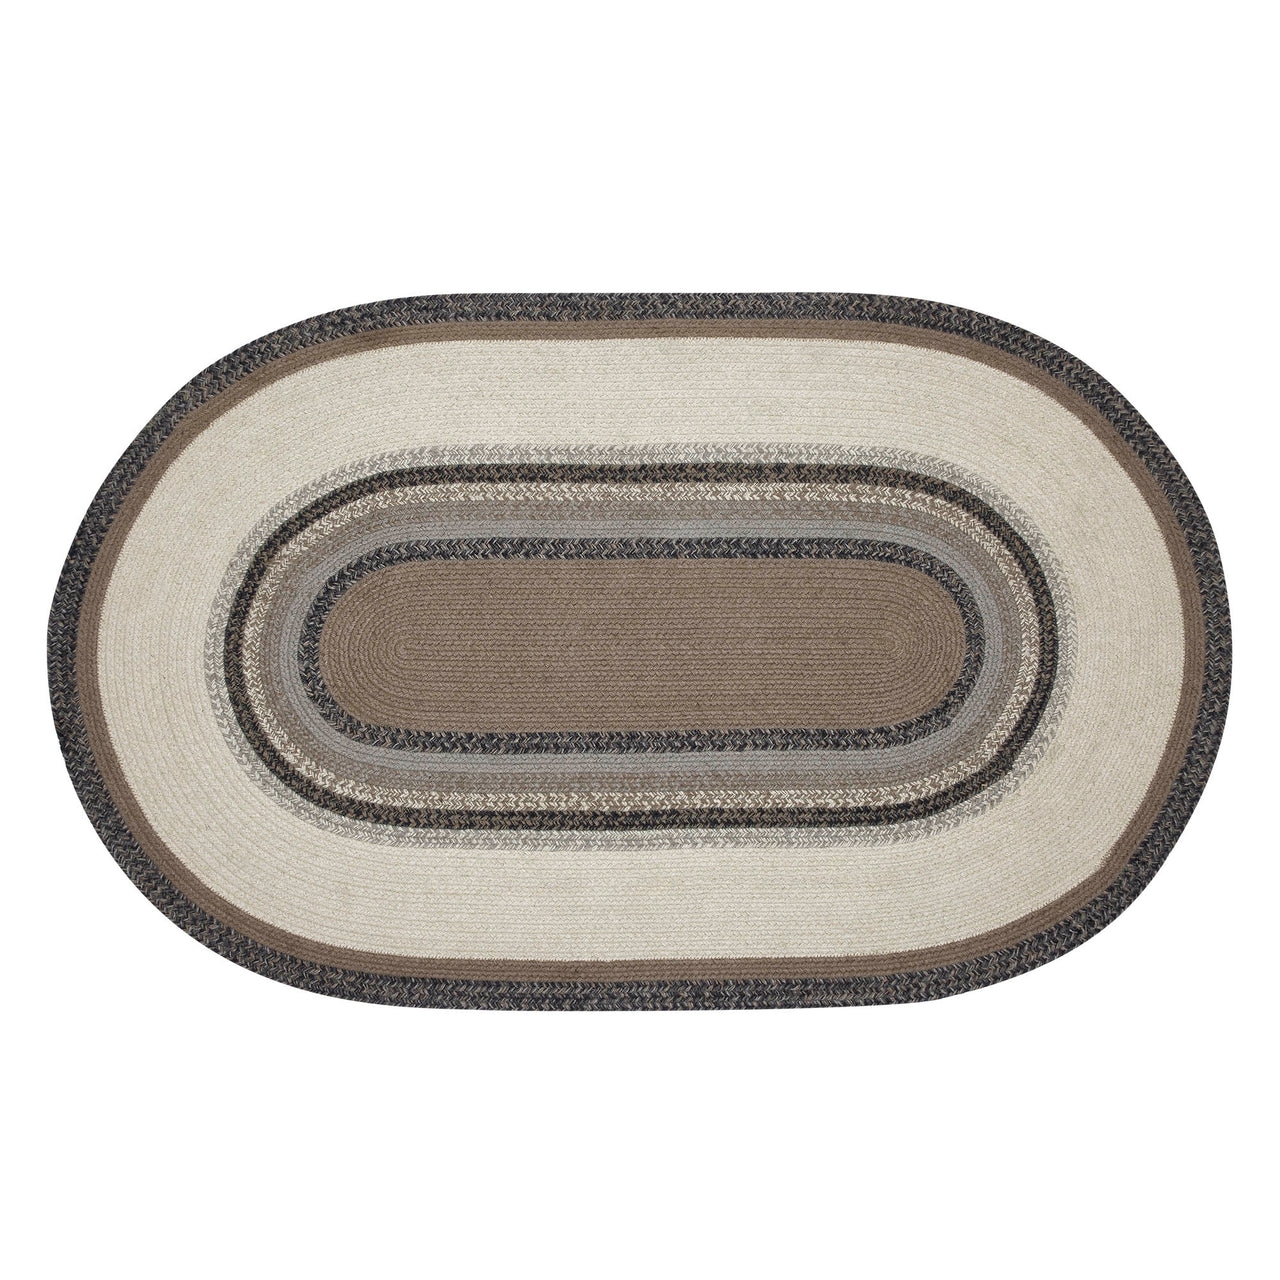 Floral Vine Jute Oval Braided Rug 3'x5' (36"x60") VHC Brands